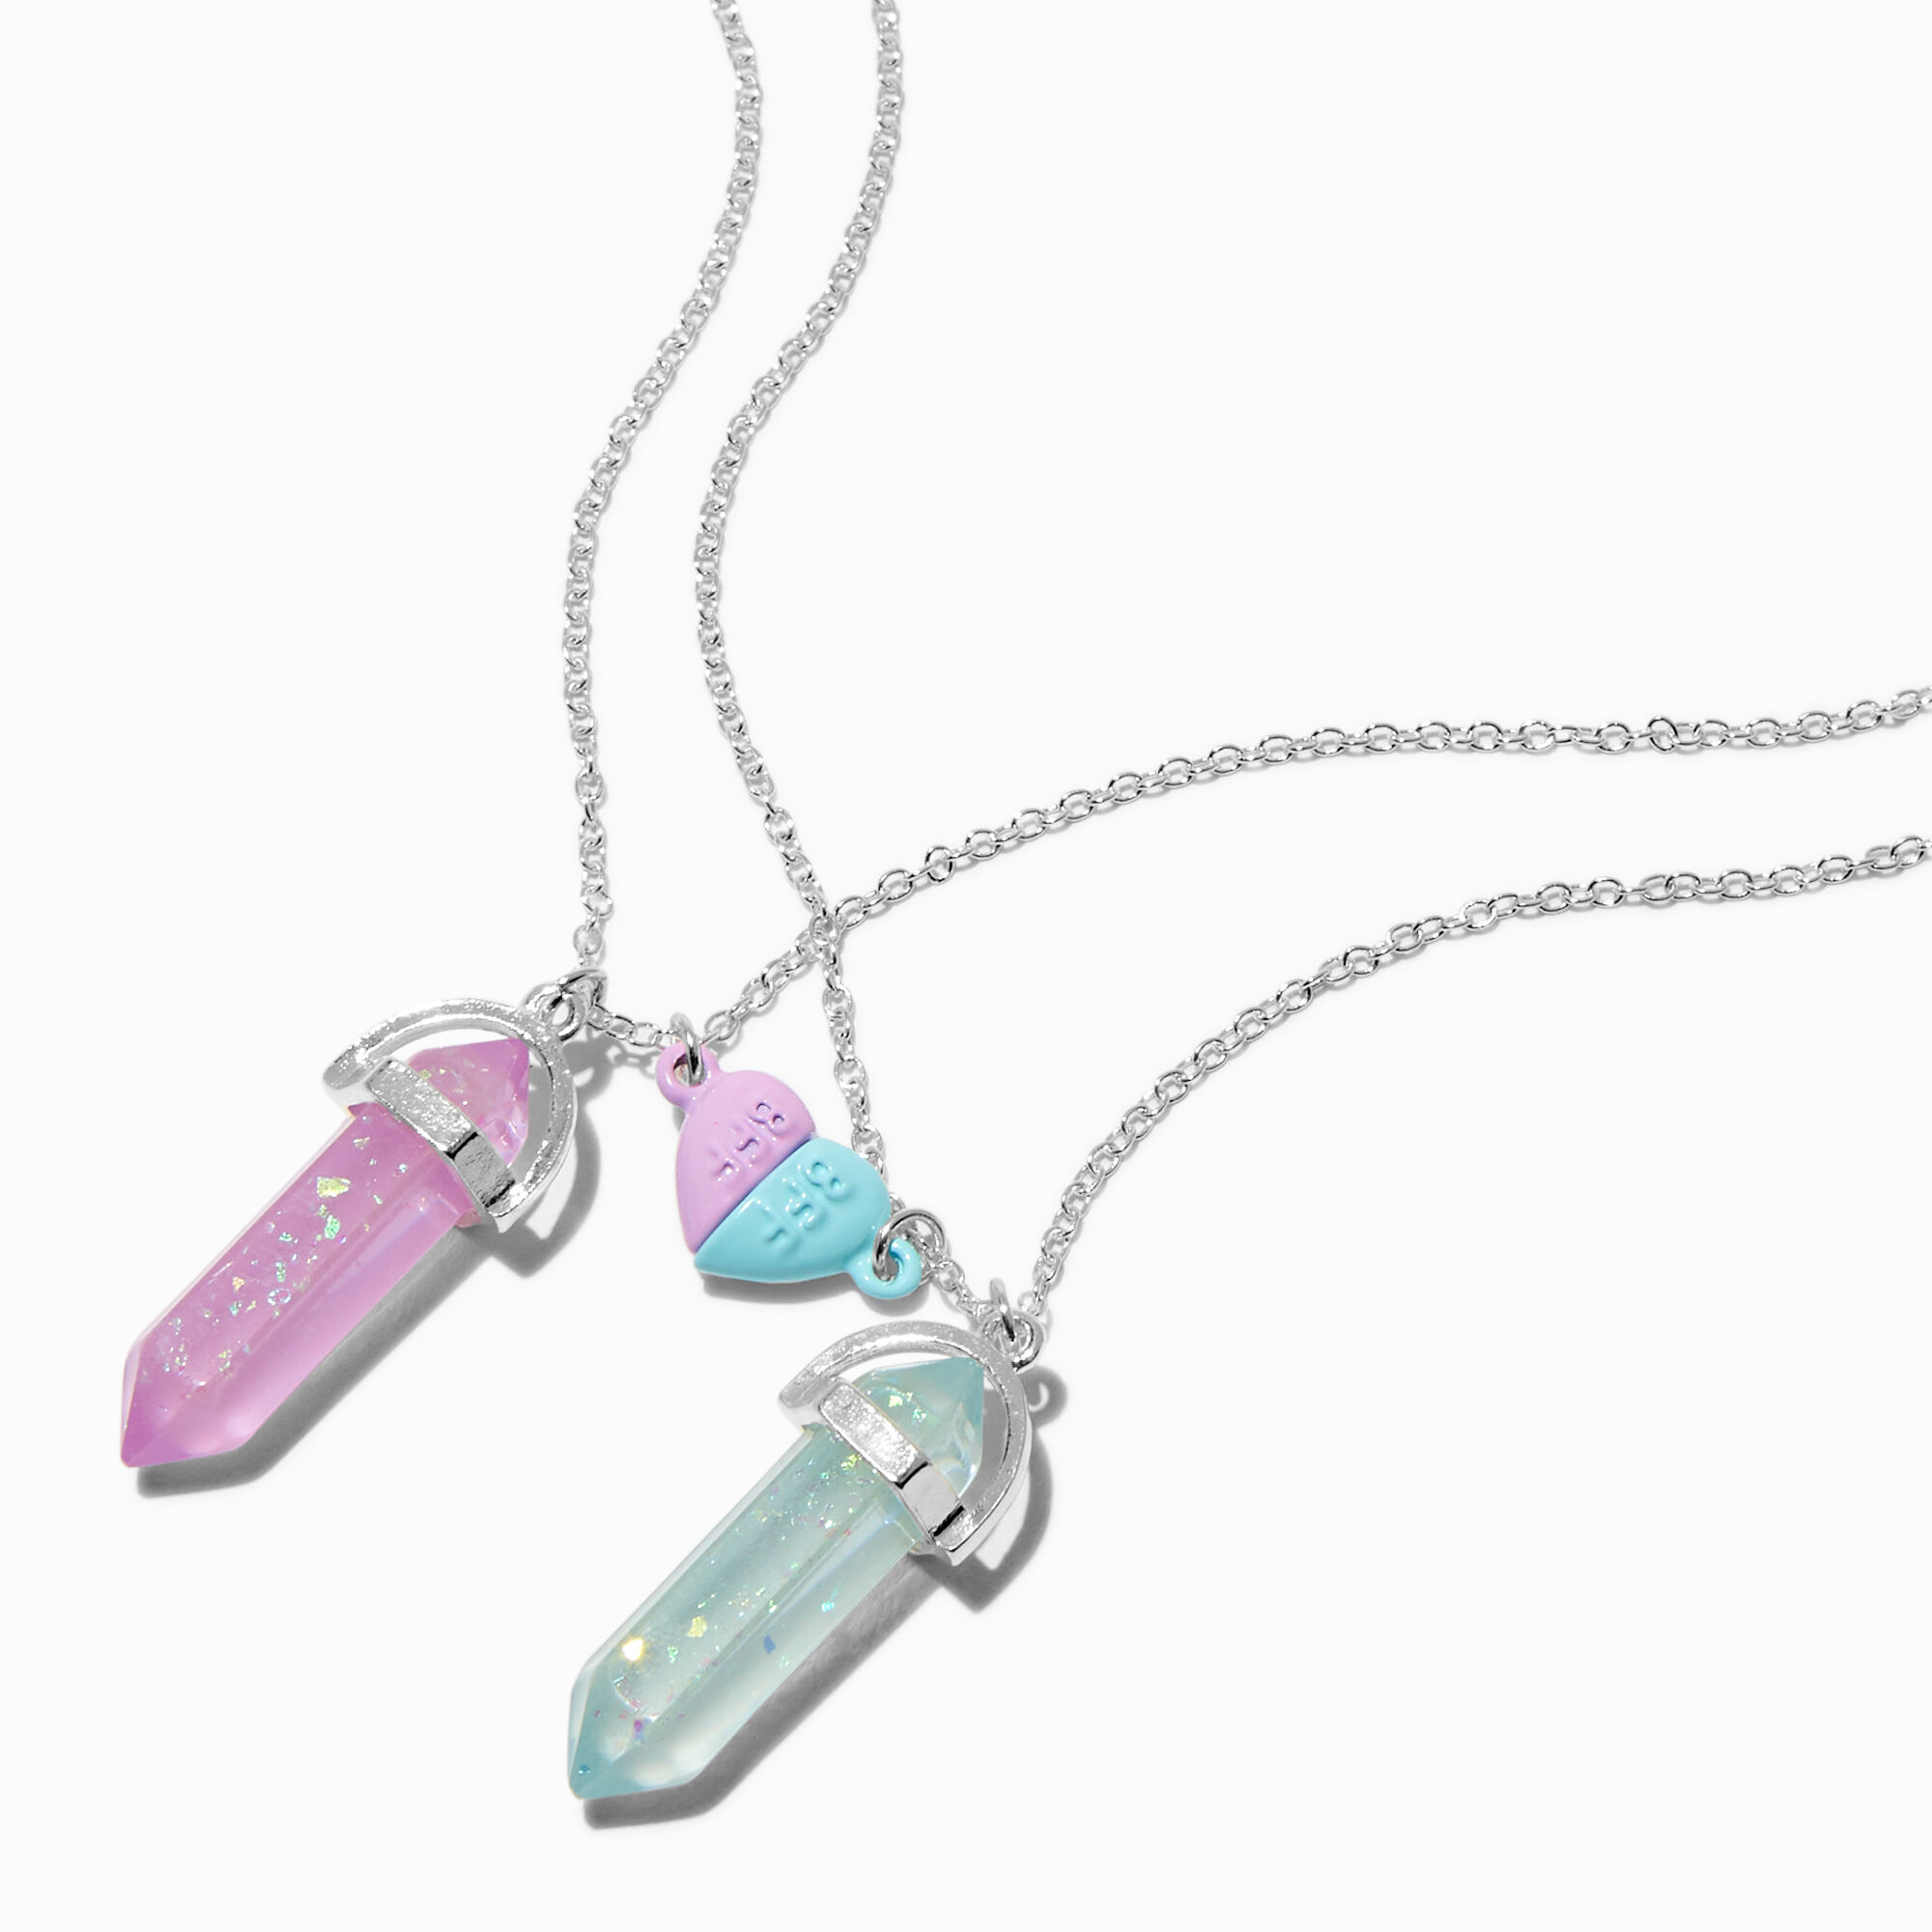 View Claires Best Friends Glow In The Dark Mystical Gem Pendant Necklaces 2 Pack Silver information